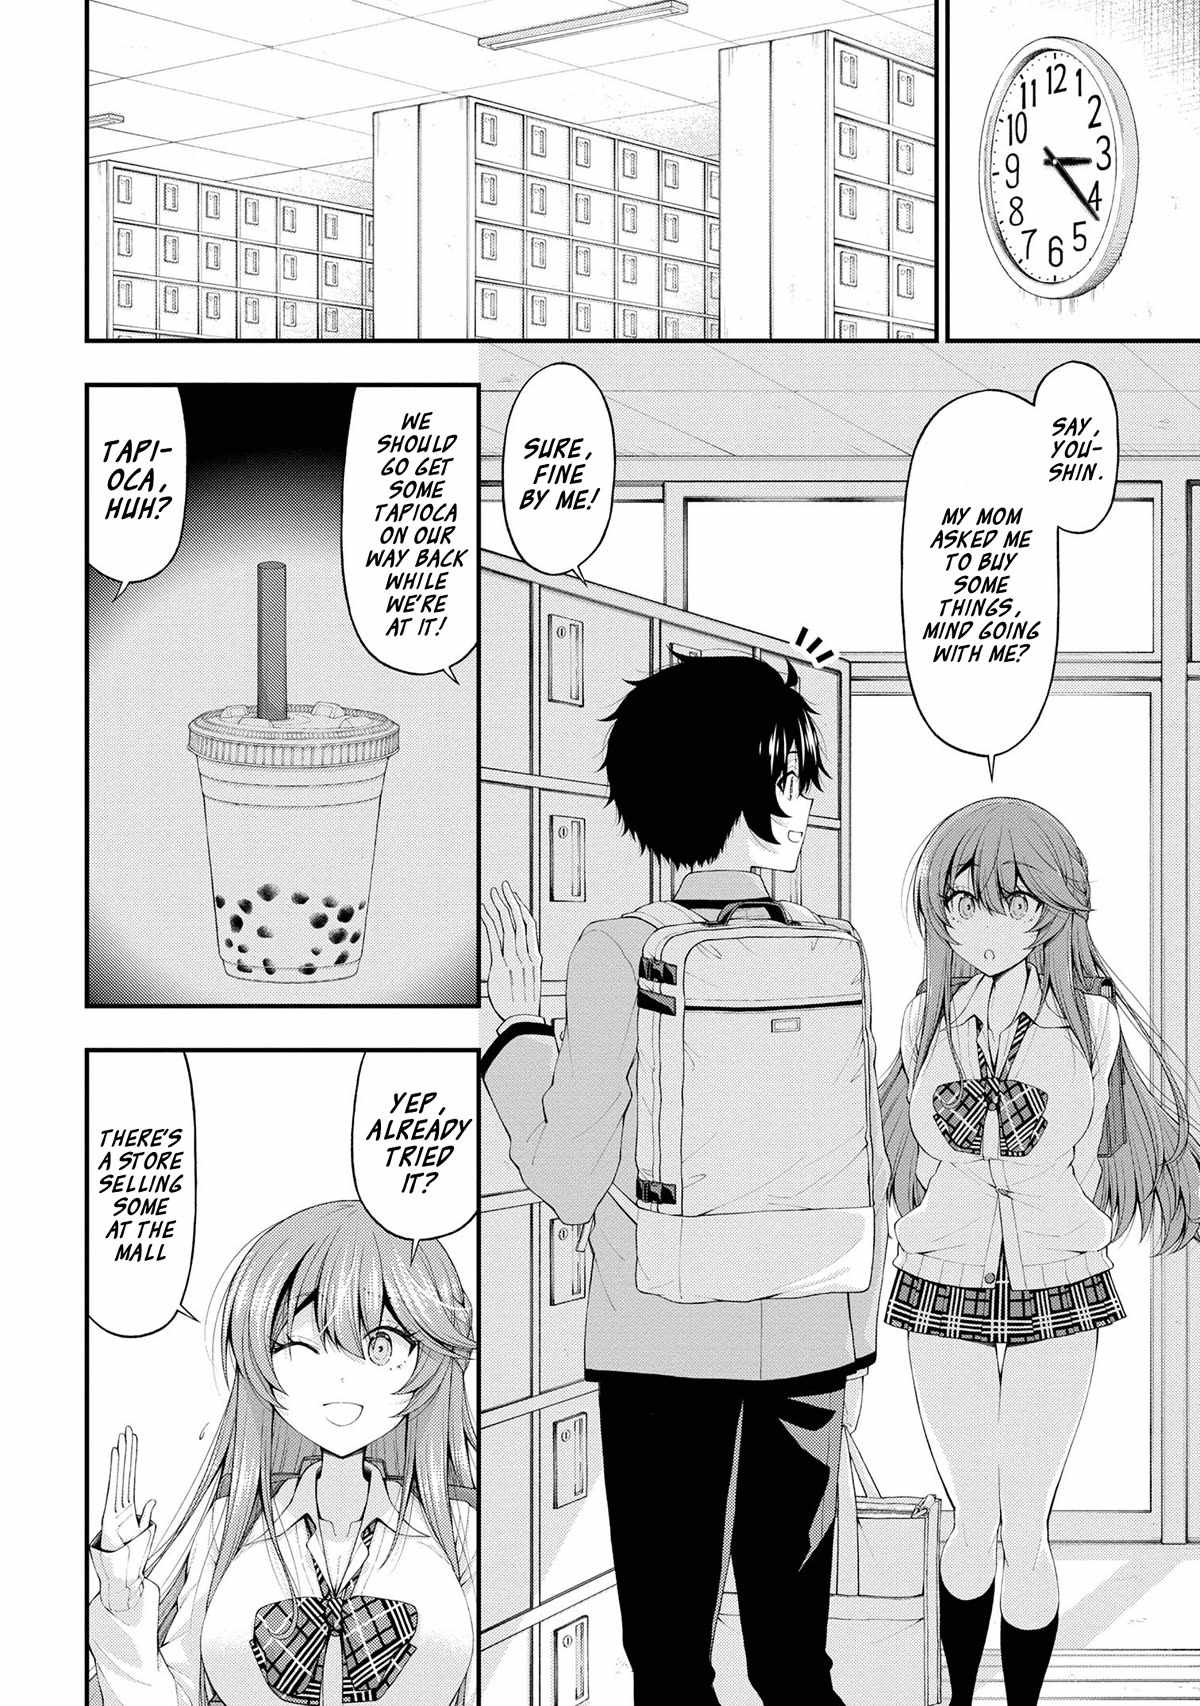 The Gal Who Was Meant to Confess to Me as a Game Punishment Has Apparently Fallen in Love with Me Chapter 13-eng-li - Page 25